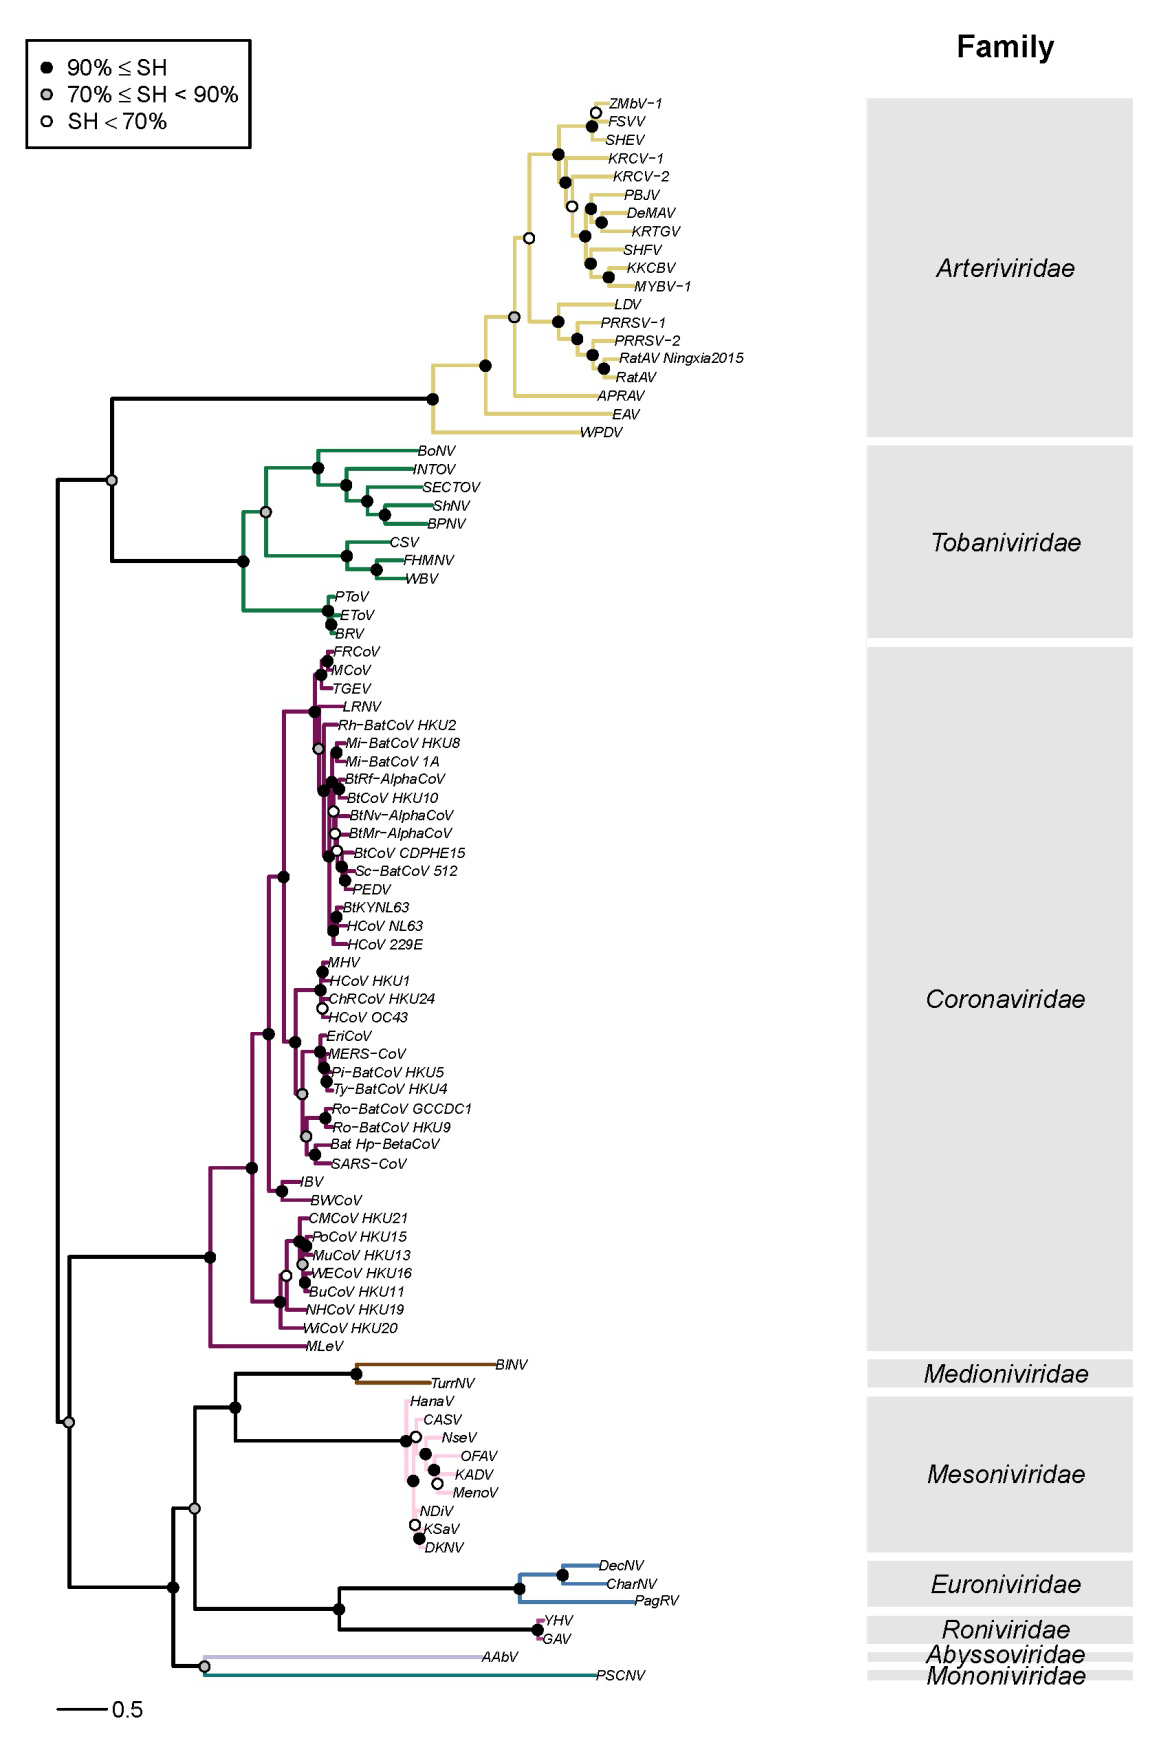 File Cluster Partitioning Of The Phylogenetic Tree Of Nidoviruses 18 By Demarc Png Wikimedia Commons